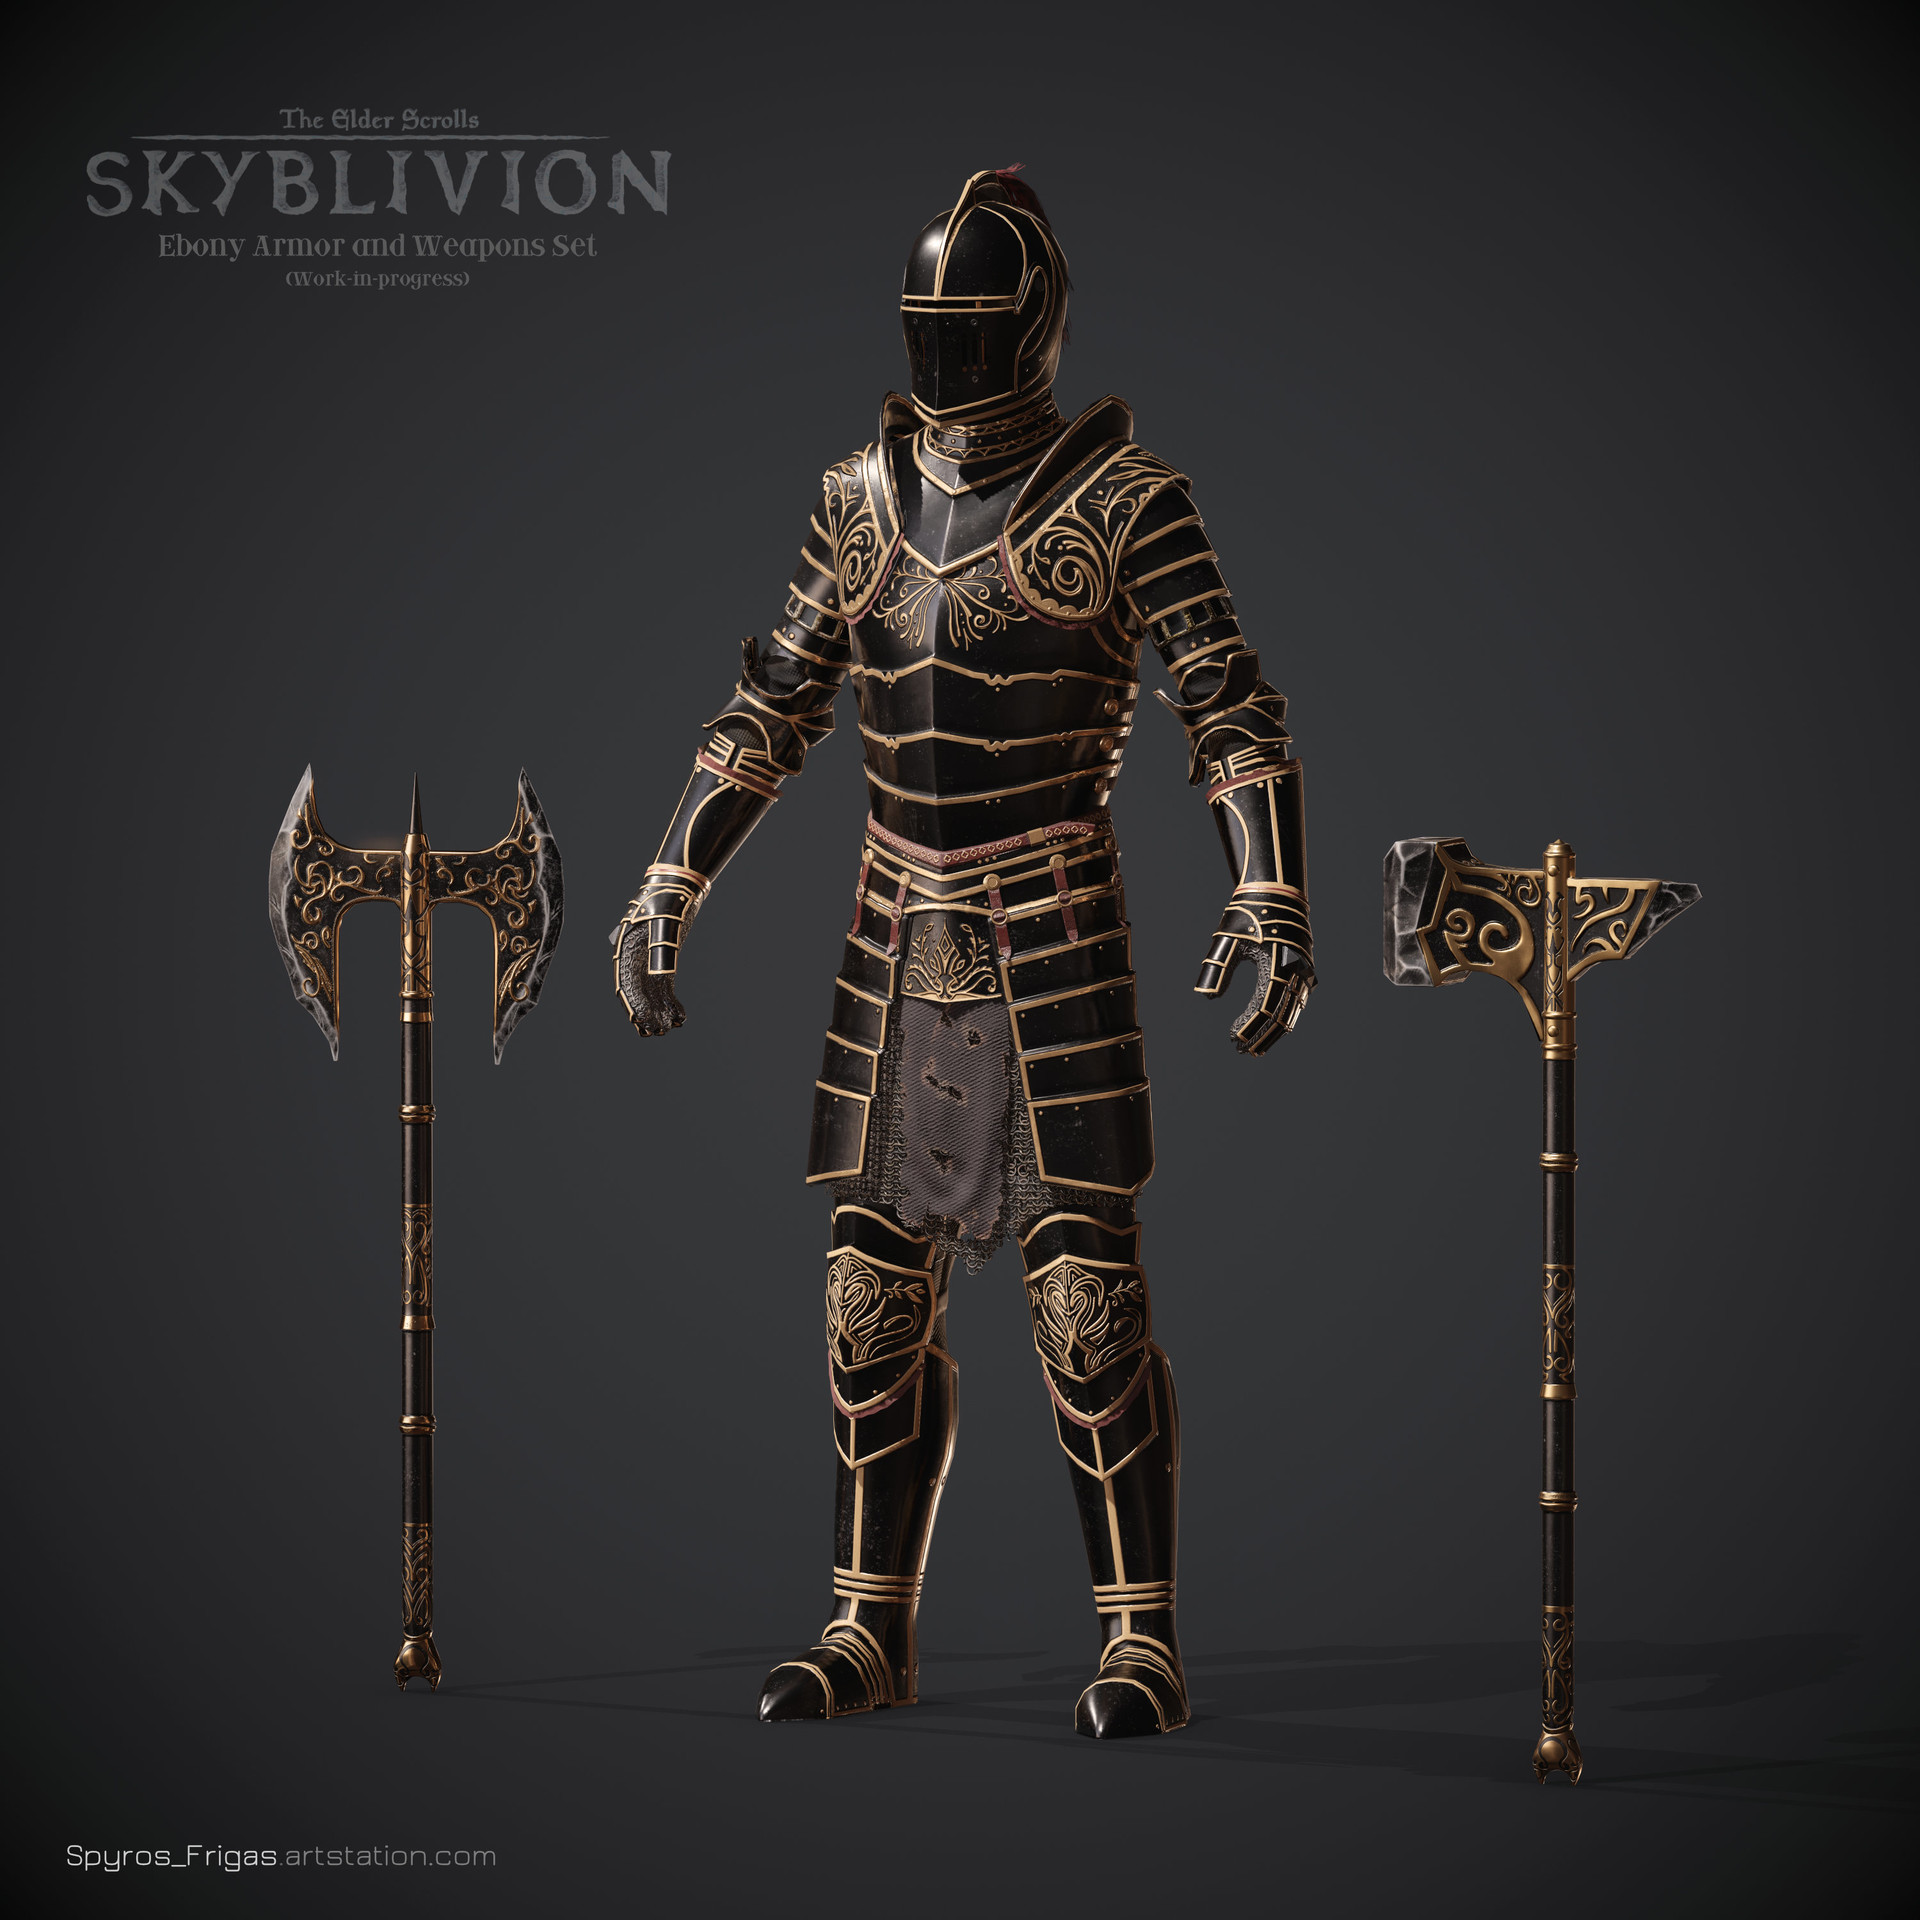 The Ebony armor and weapons set in the making. 